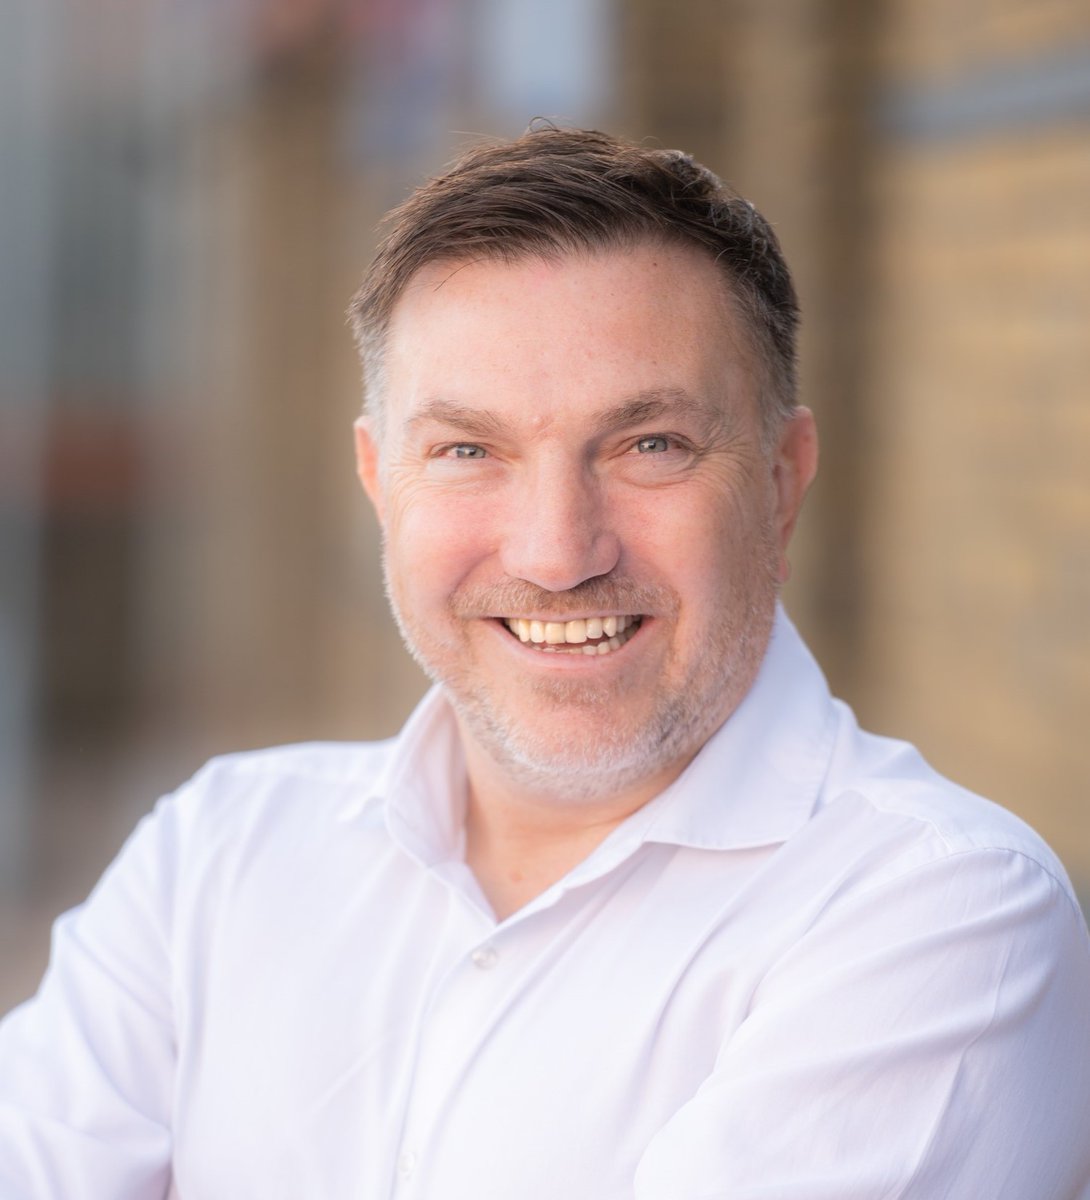 Harmonic, an #EnviroTech company that uses #AI to help #decarbonise buildings has appointed David Grundy as its new #ManagingDirector to accelerate its #growth plans.

➡️fmuk-online.co.uk/features/4326
#facman #FacilitiesMgmt #environment #technology #IOT #NetZero